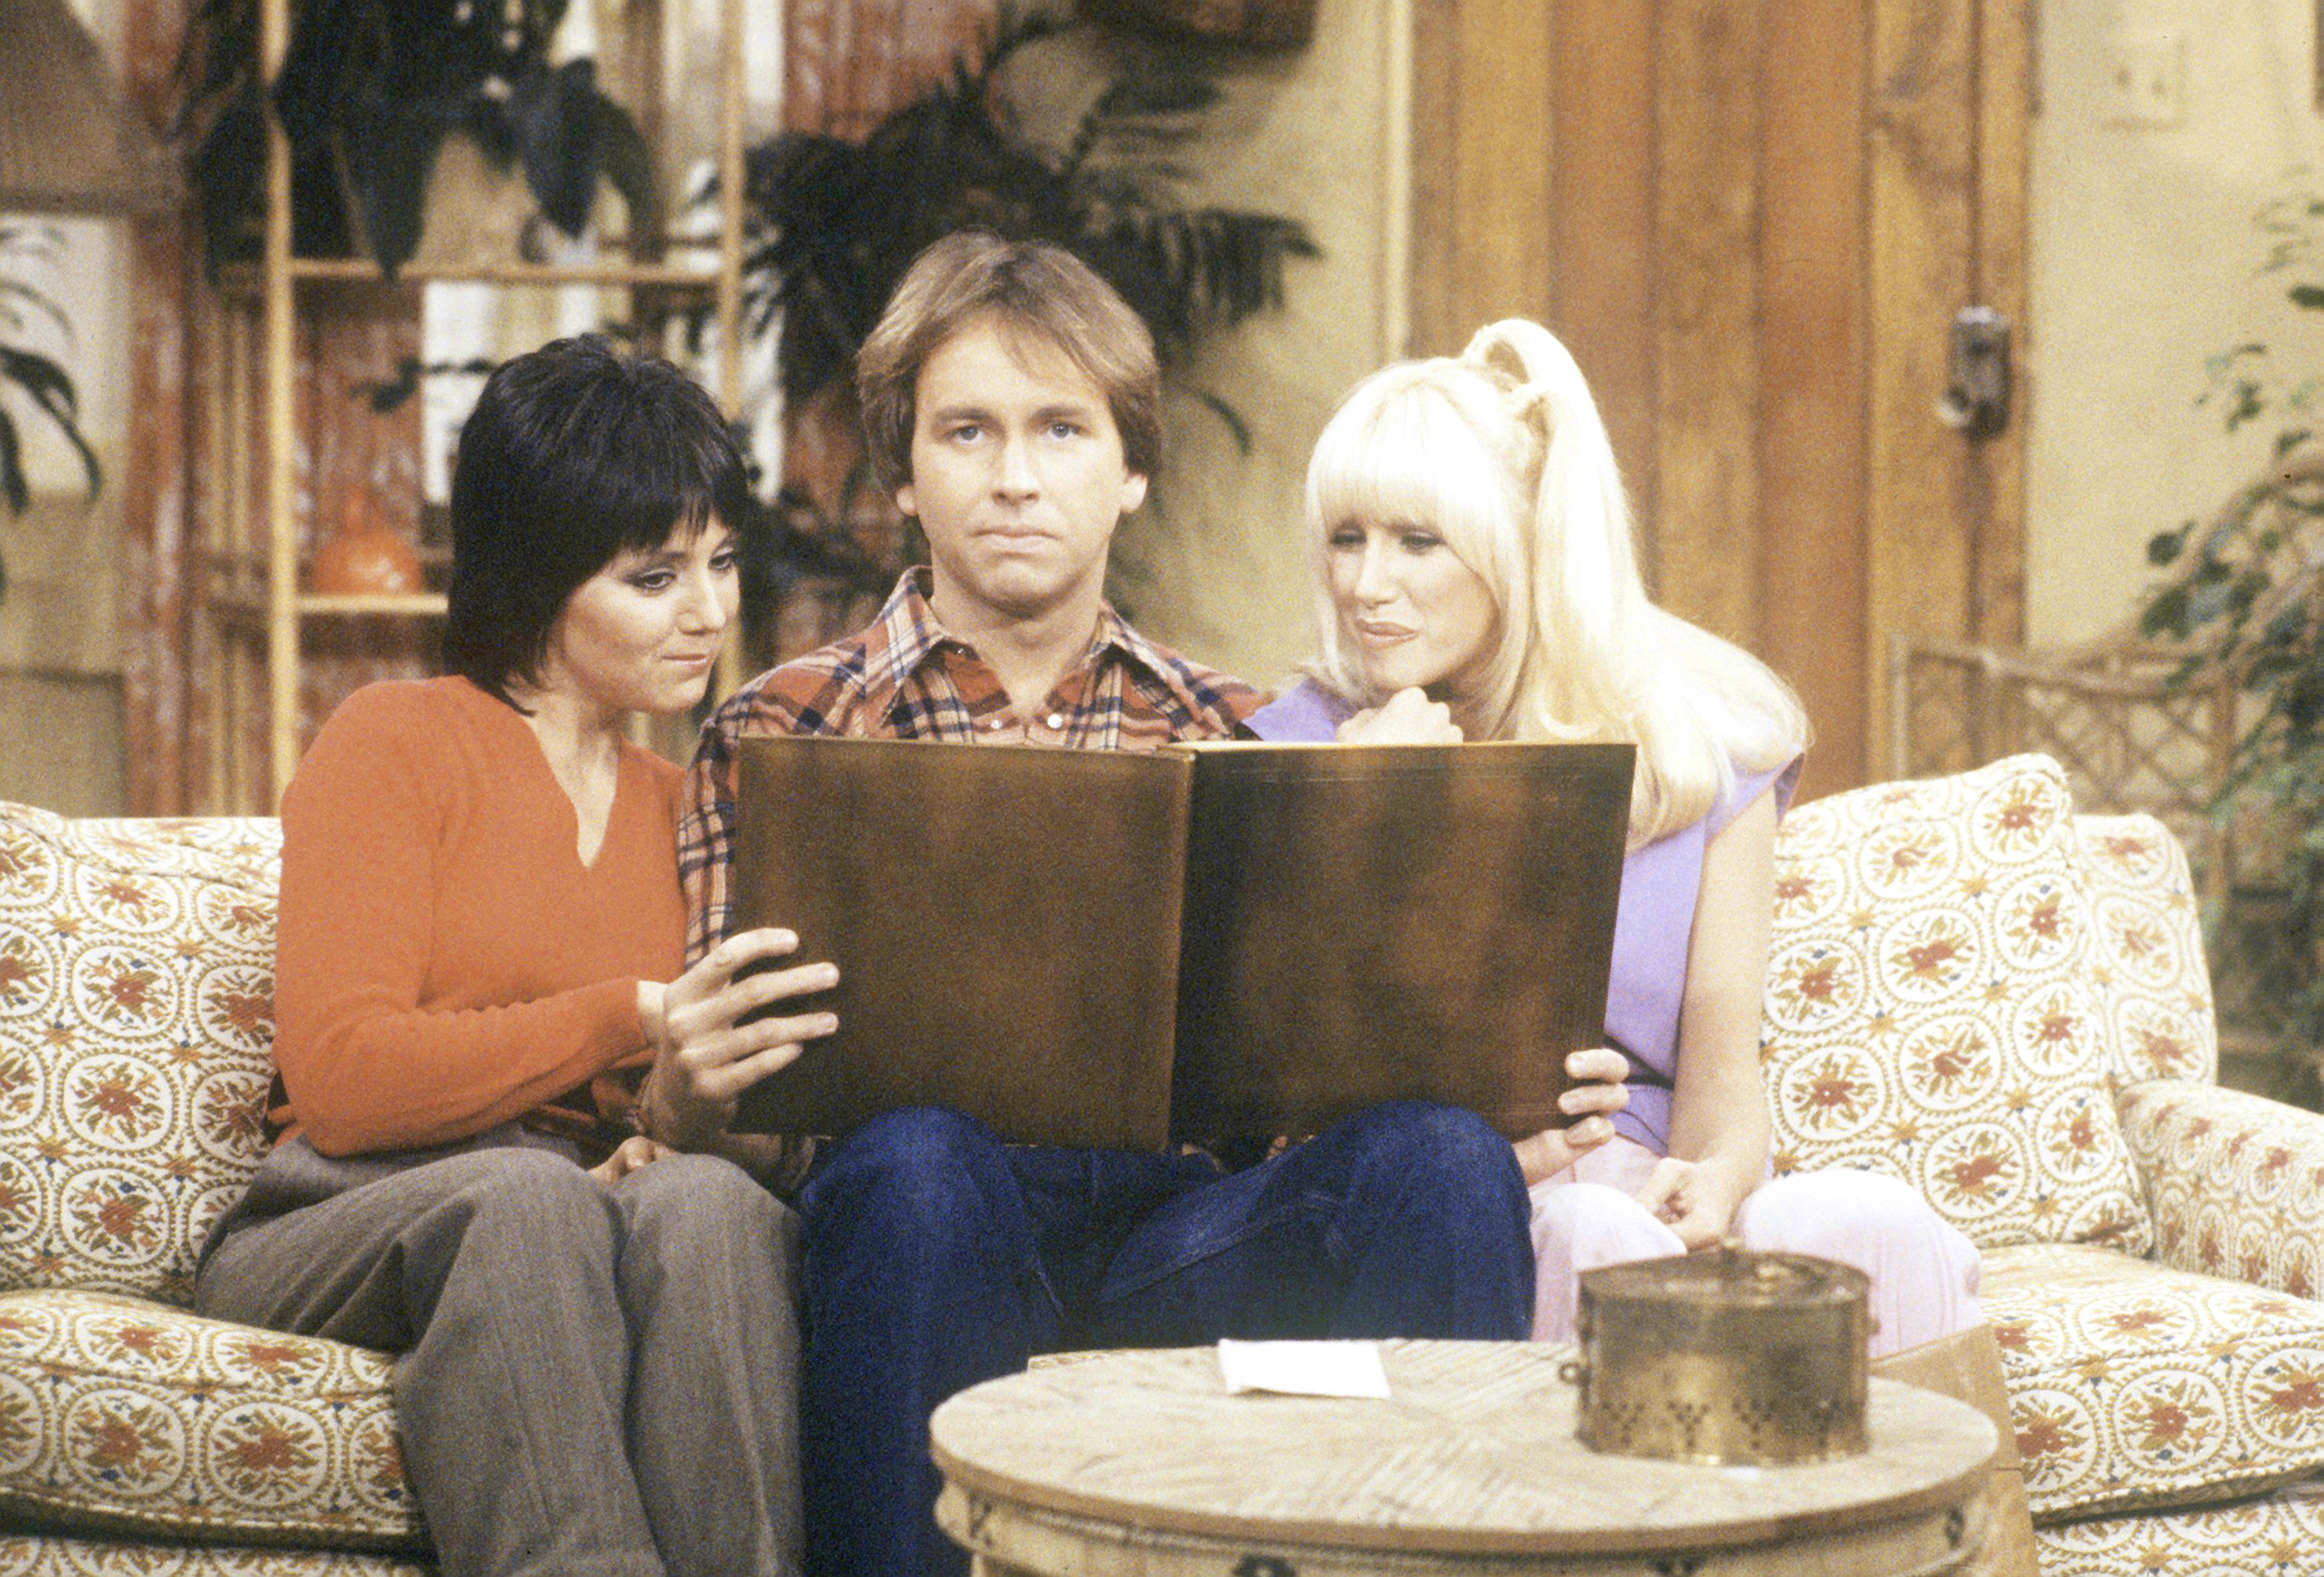 Jack (John Ritter), Chrissy (Suzanne Somers on the right), and Janet (Joyce DeWitt) in the episode titled "Lee Ain't Heavy, He's My Brother" from Season Four of "Three's Company," which aired on February 26, 1980 | Source: Getty Images